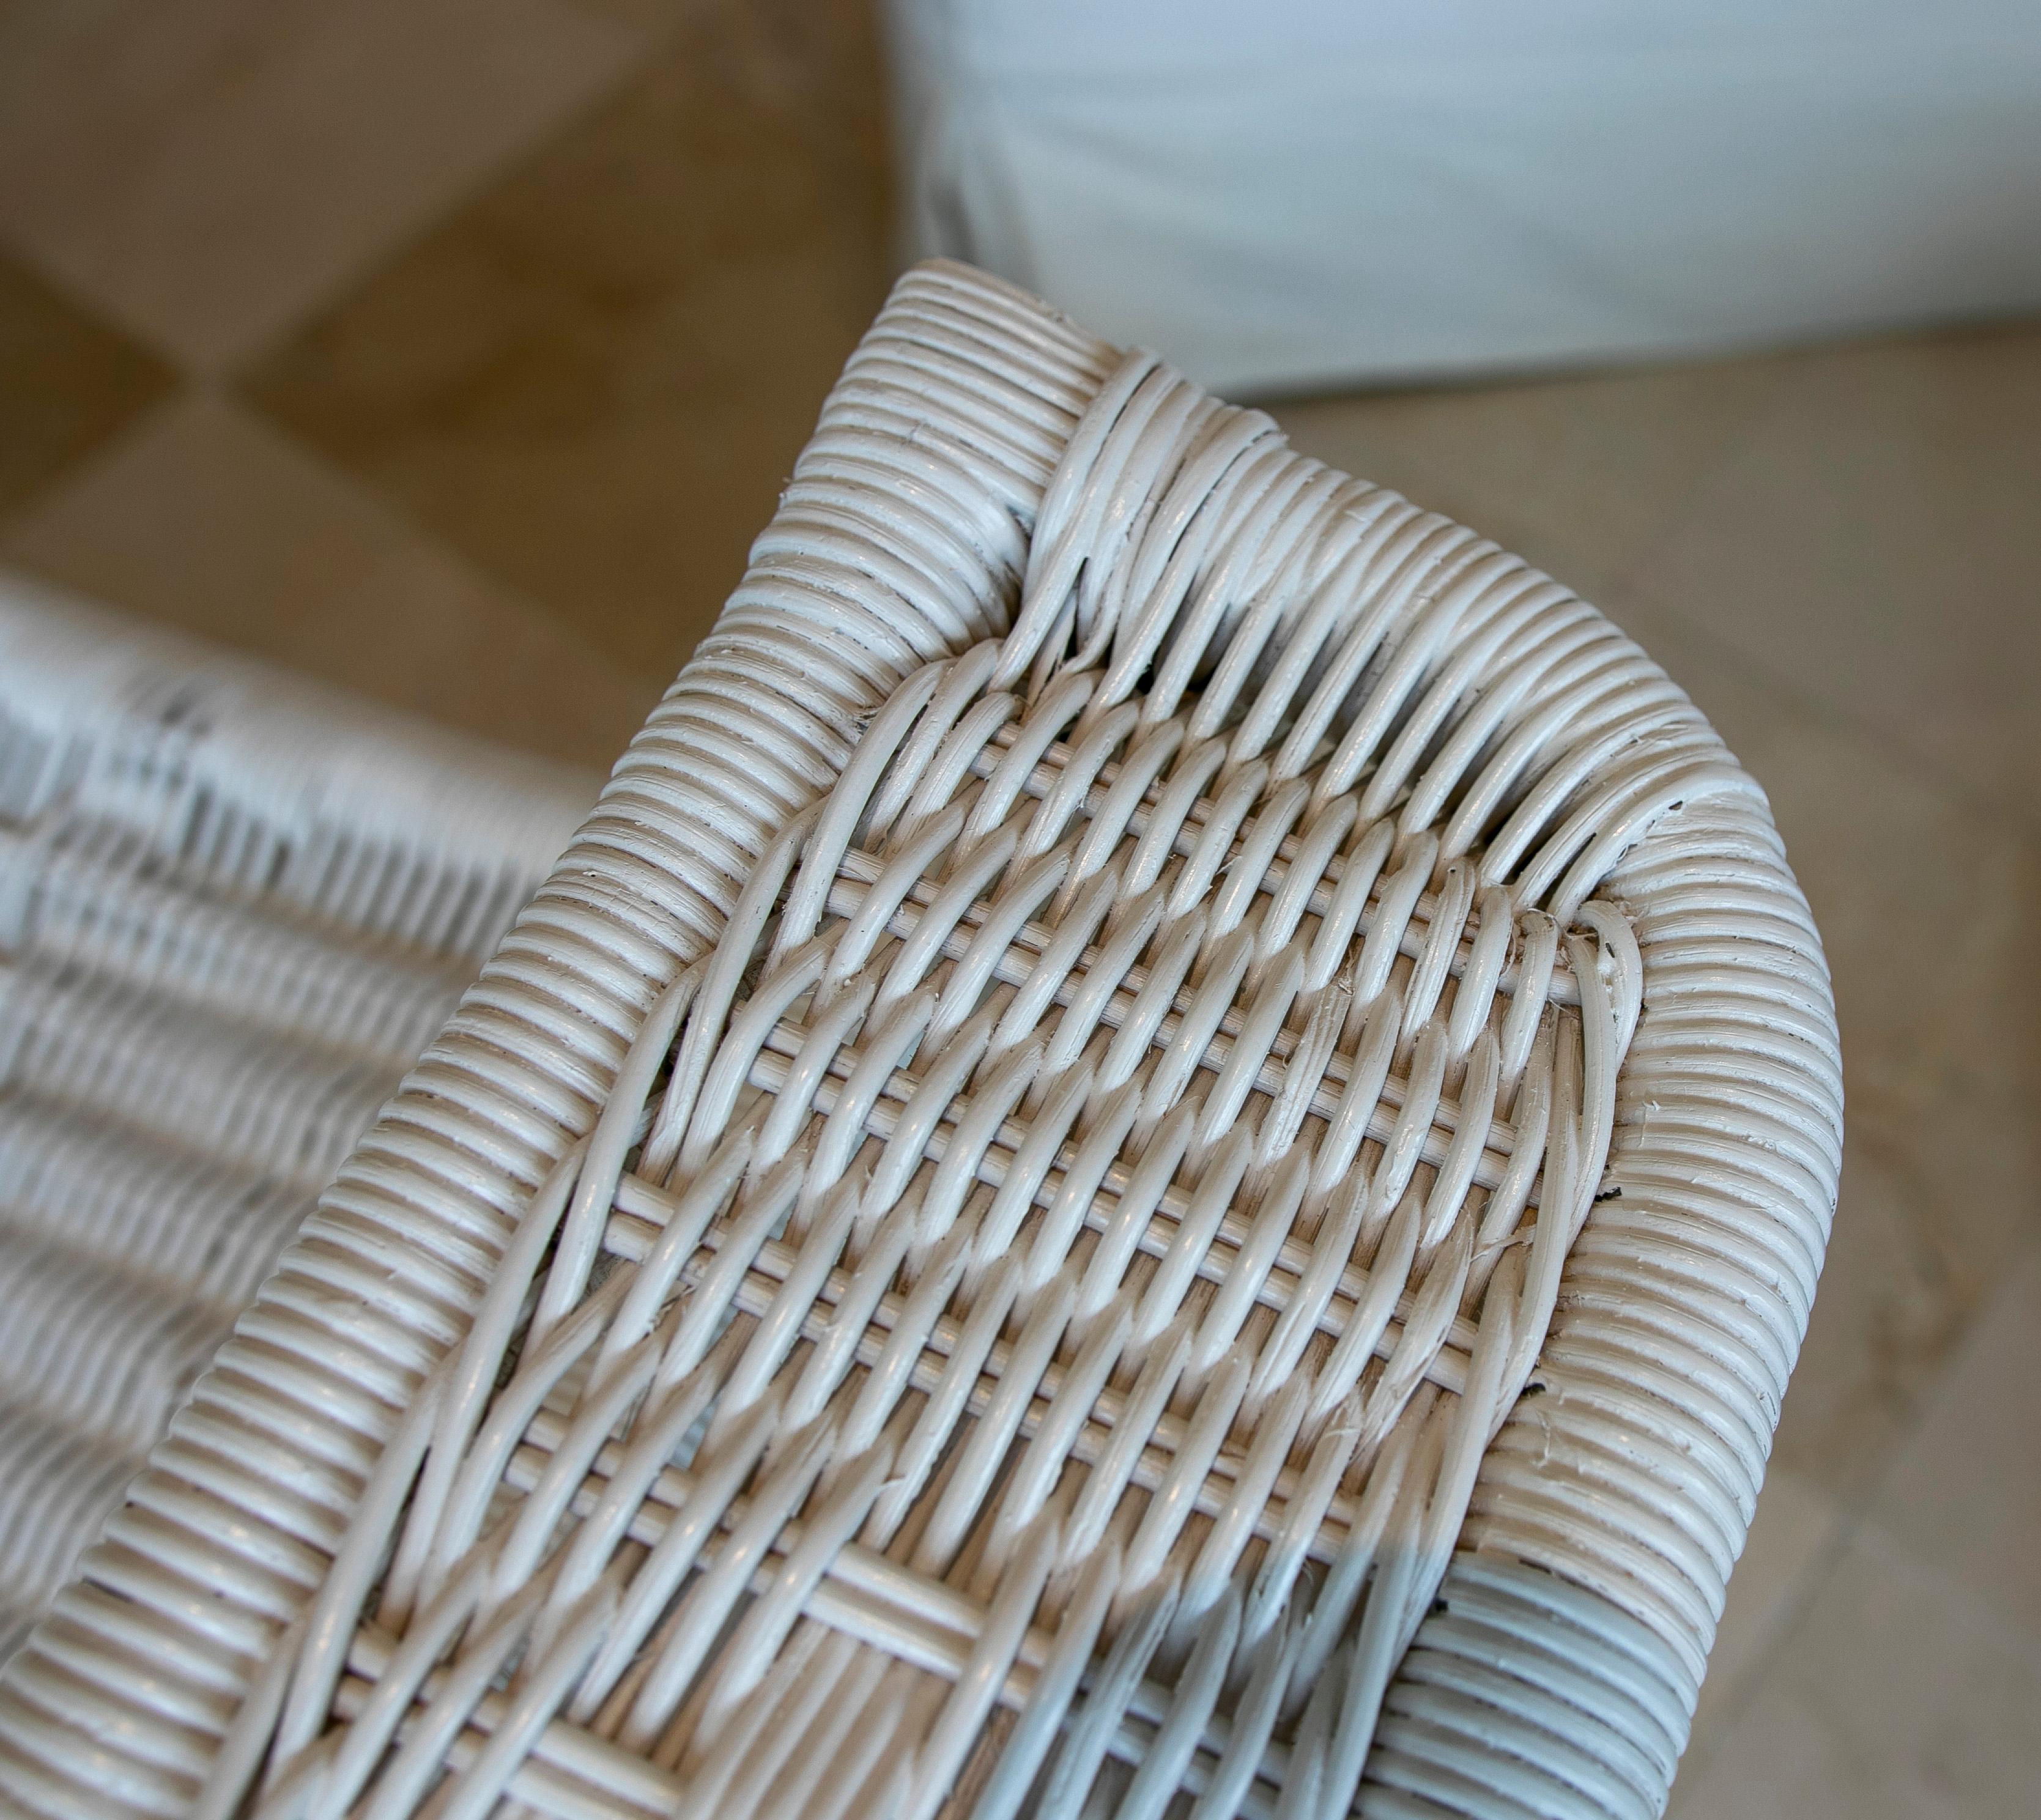 Spanish Handmade Wicker Stool Lacquered in White Colour For Sale 12